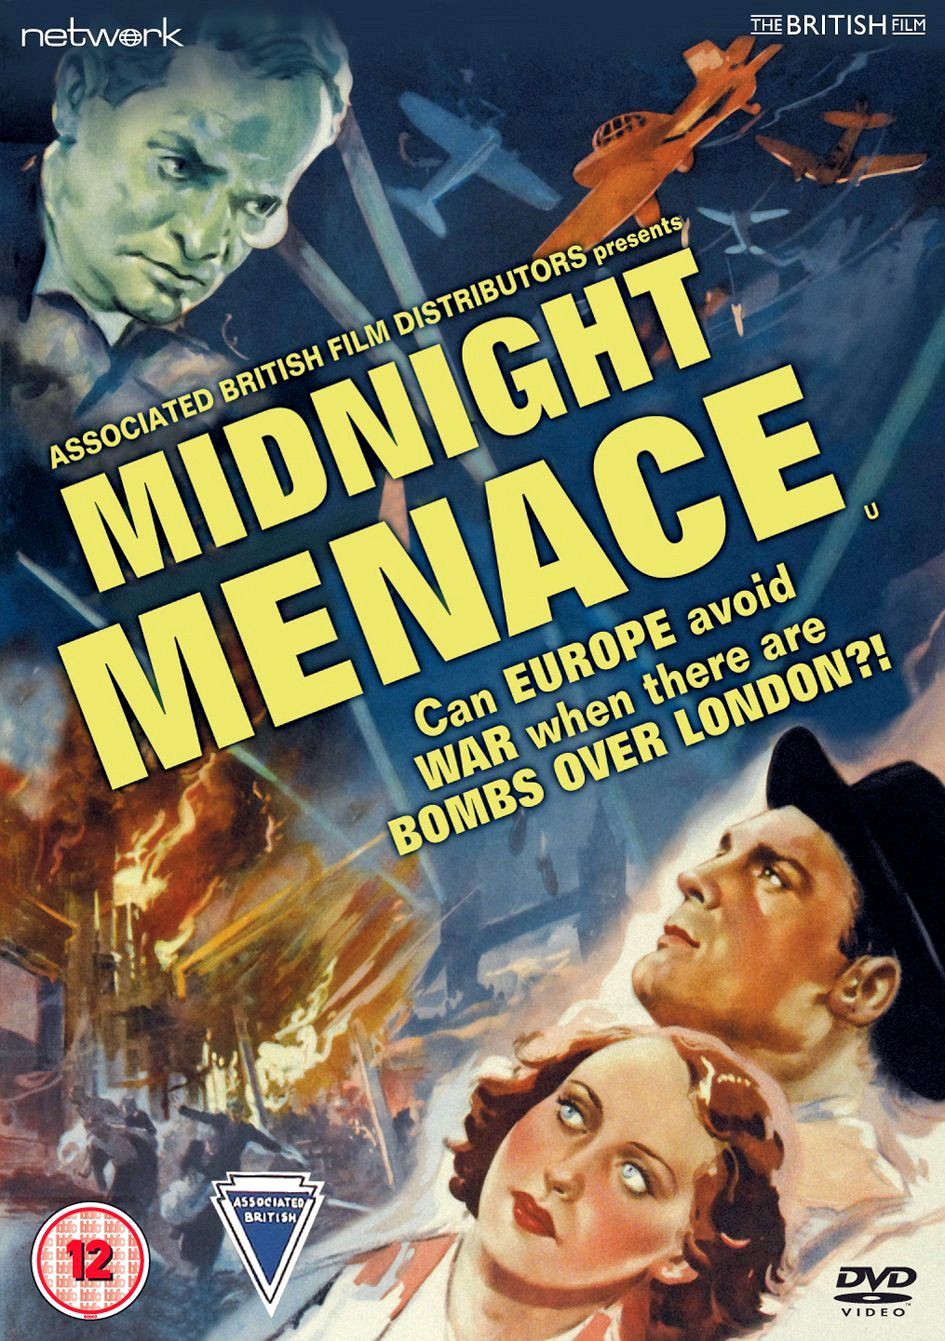 Midnight Menace DVD from Network andThe British Film